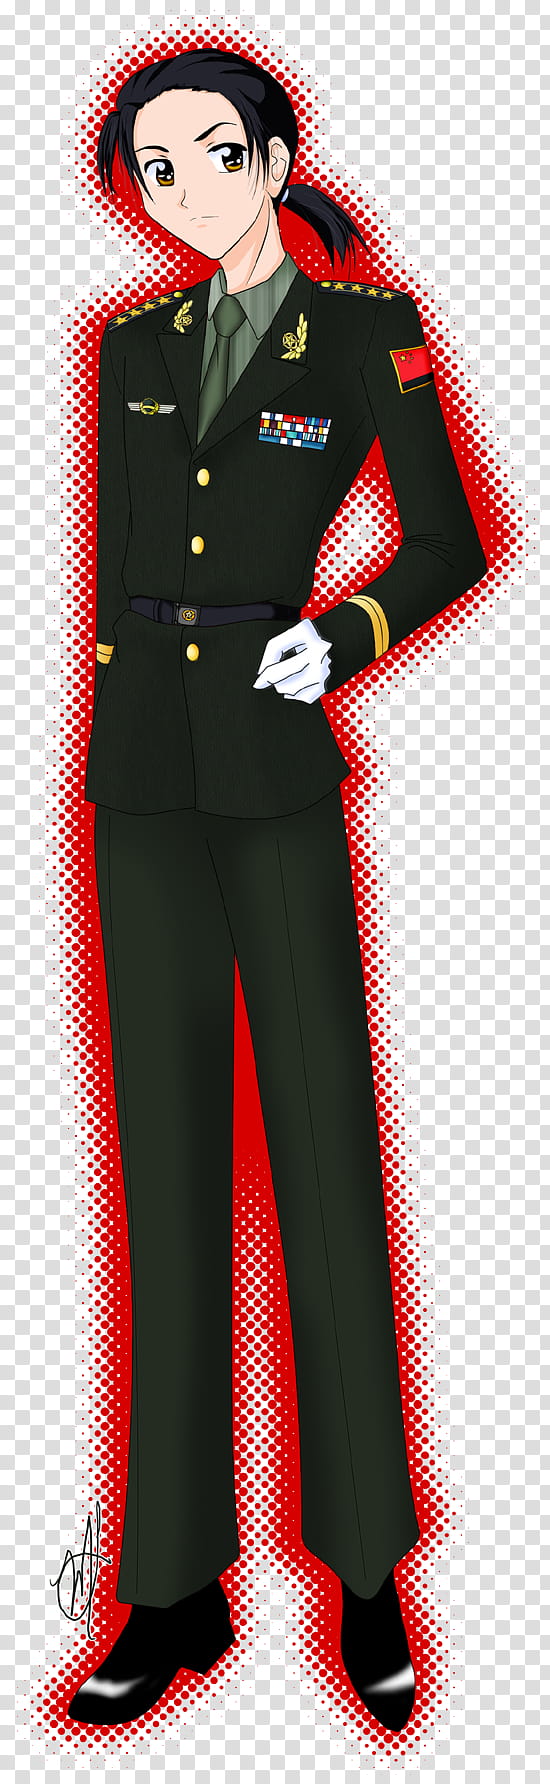 Hetalia, China uniform, woman anime character in black suit illustration transparent background PNG clipart